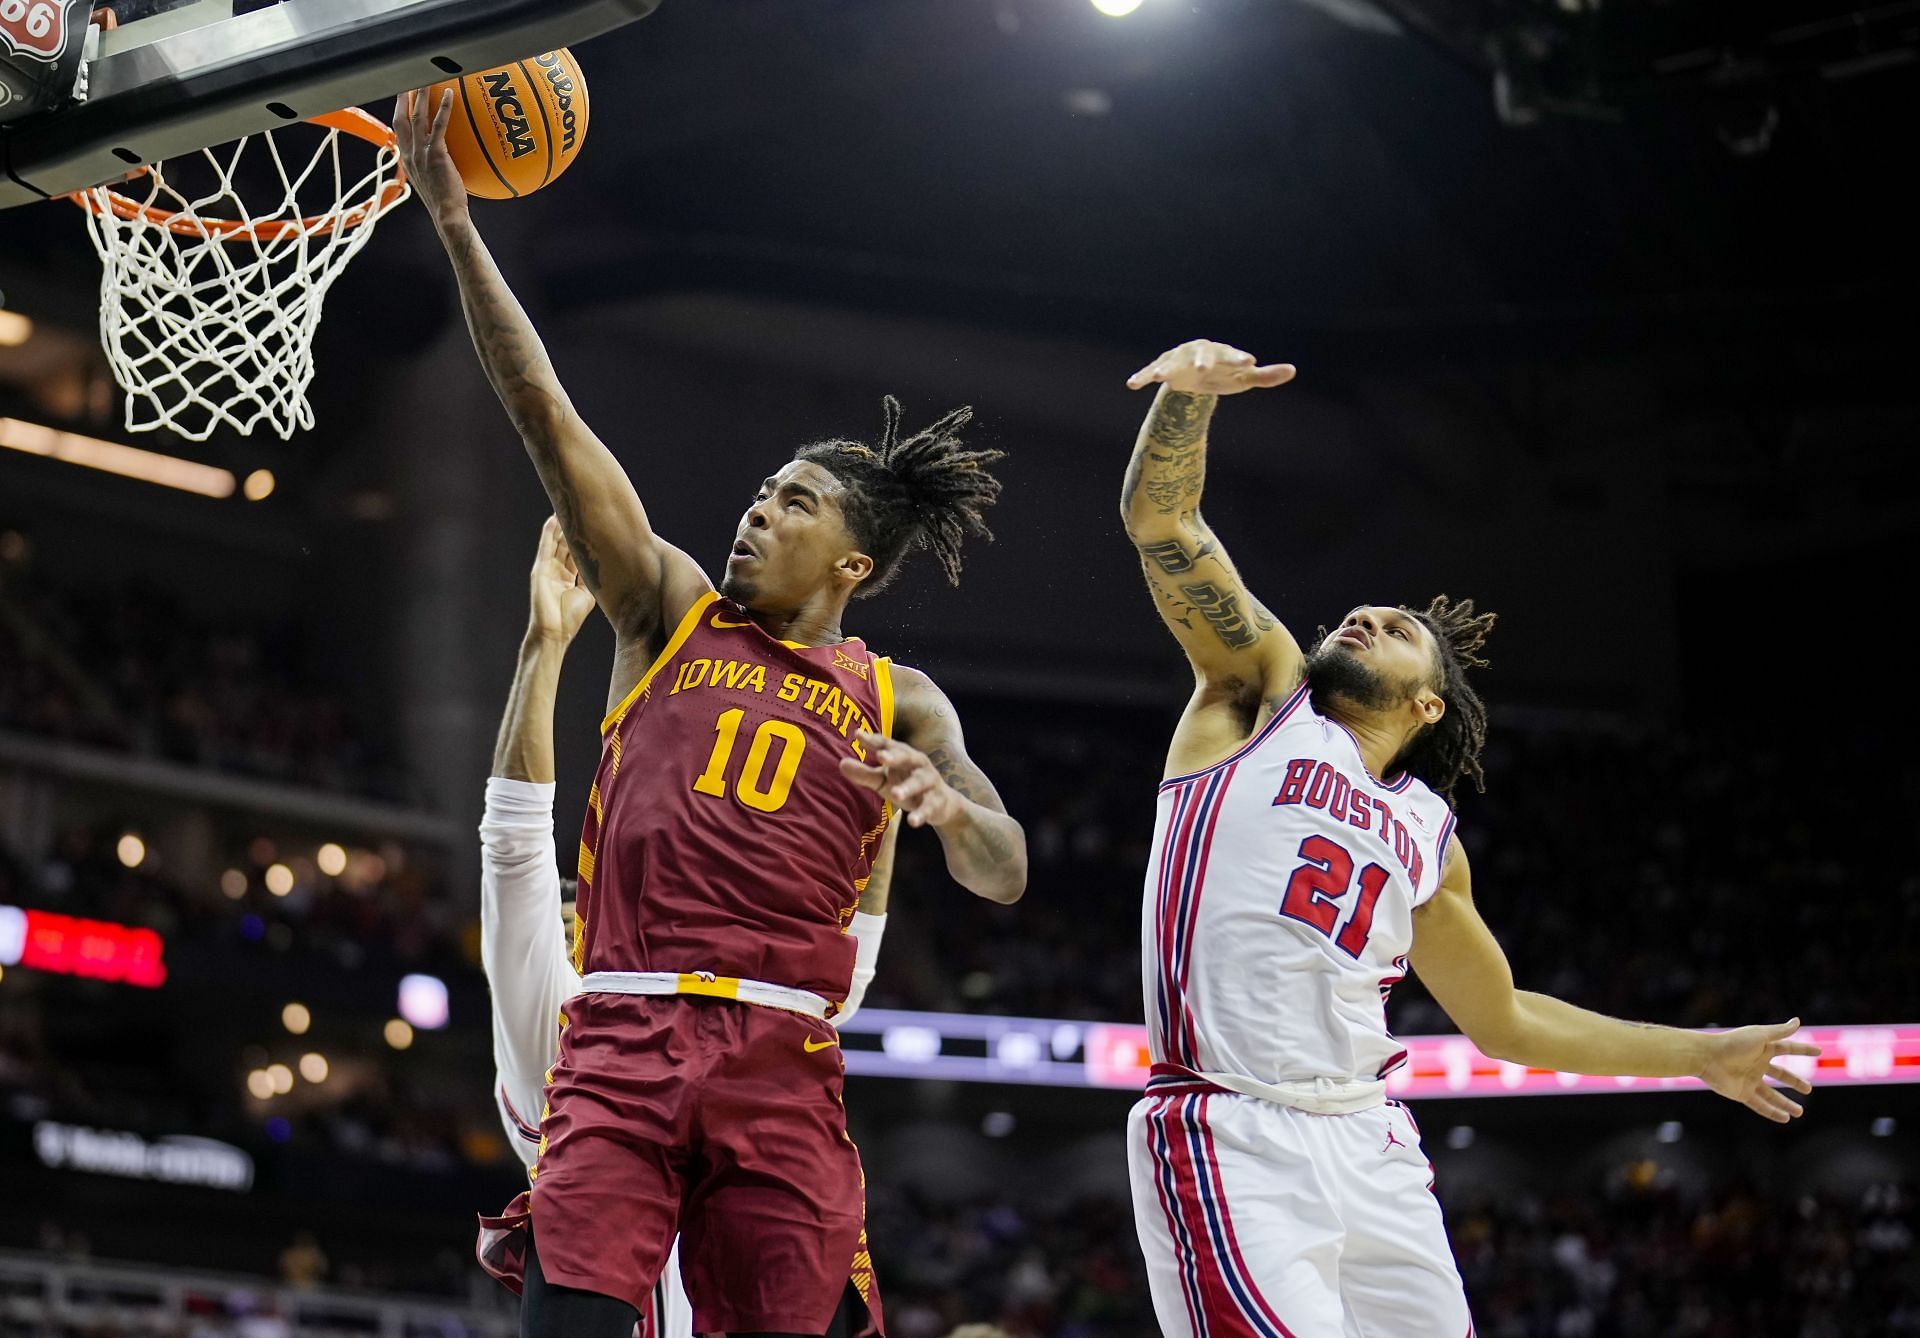 The Iowa State Cyclones have defeated AP and Coaches Poll No. 1 seed Houston twice this season.